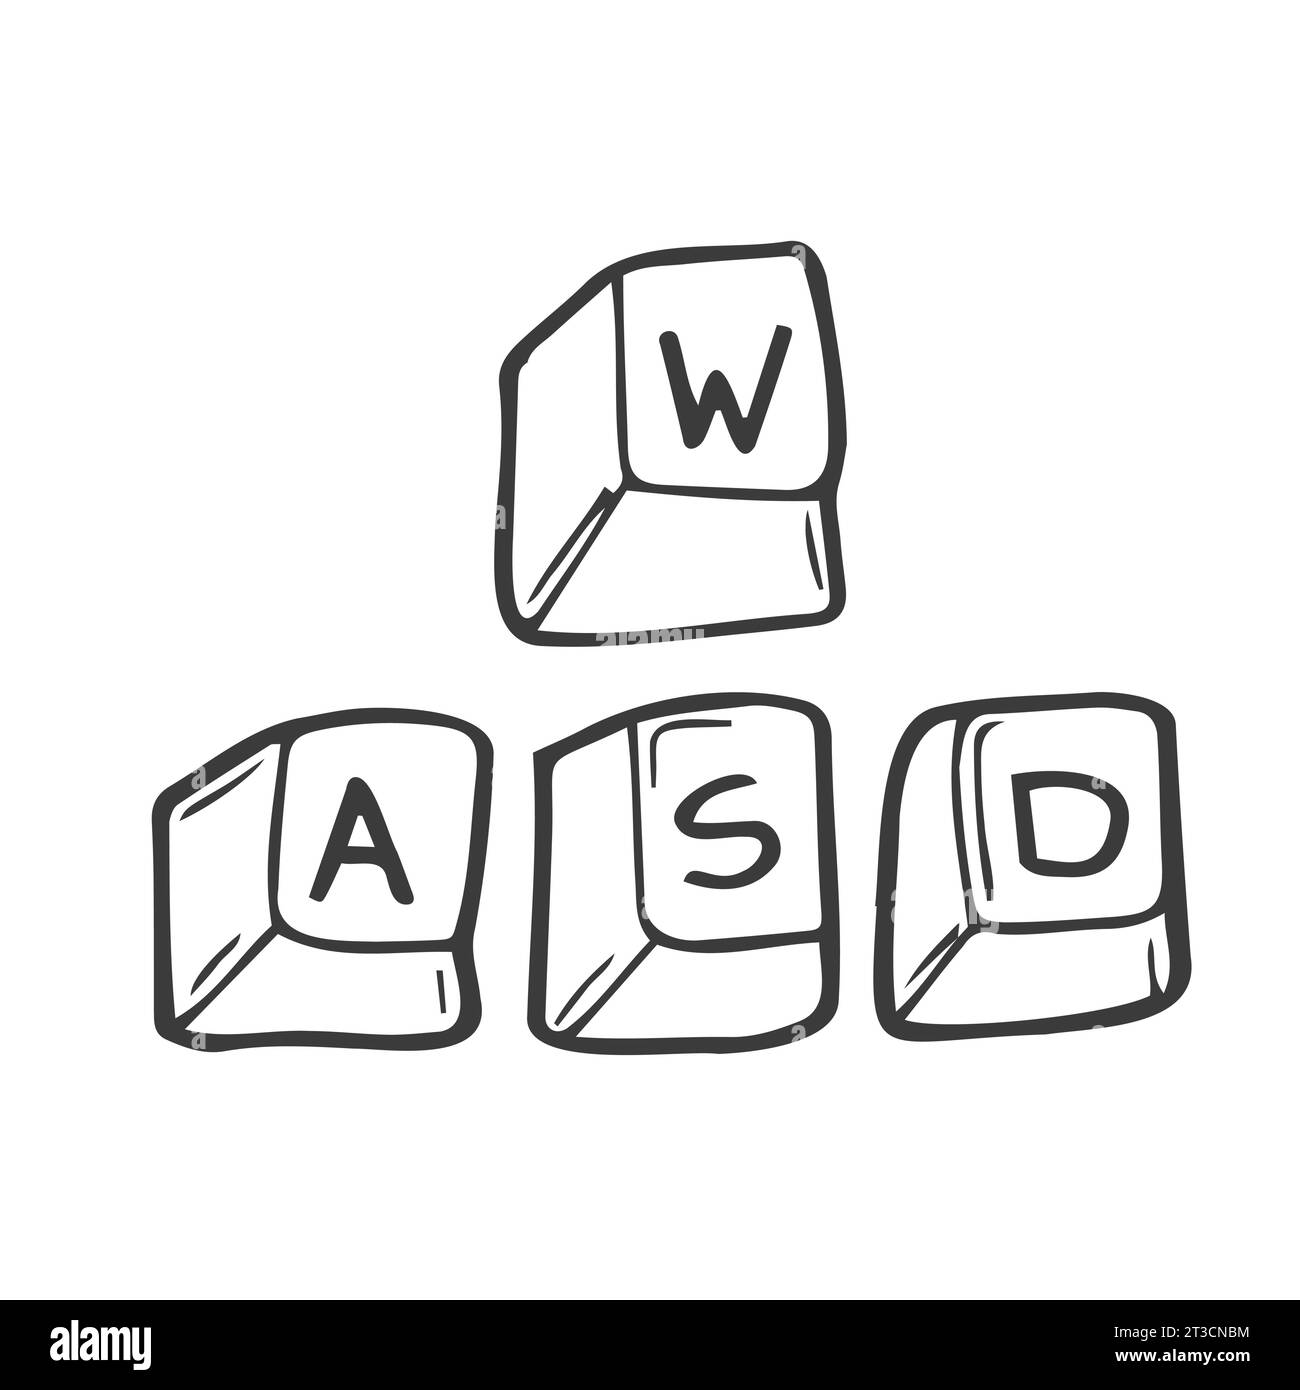 WASD keyboard keys used in PC video games. Gaming concept Stock Vector